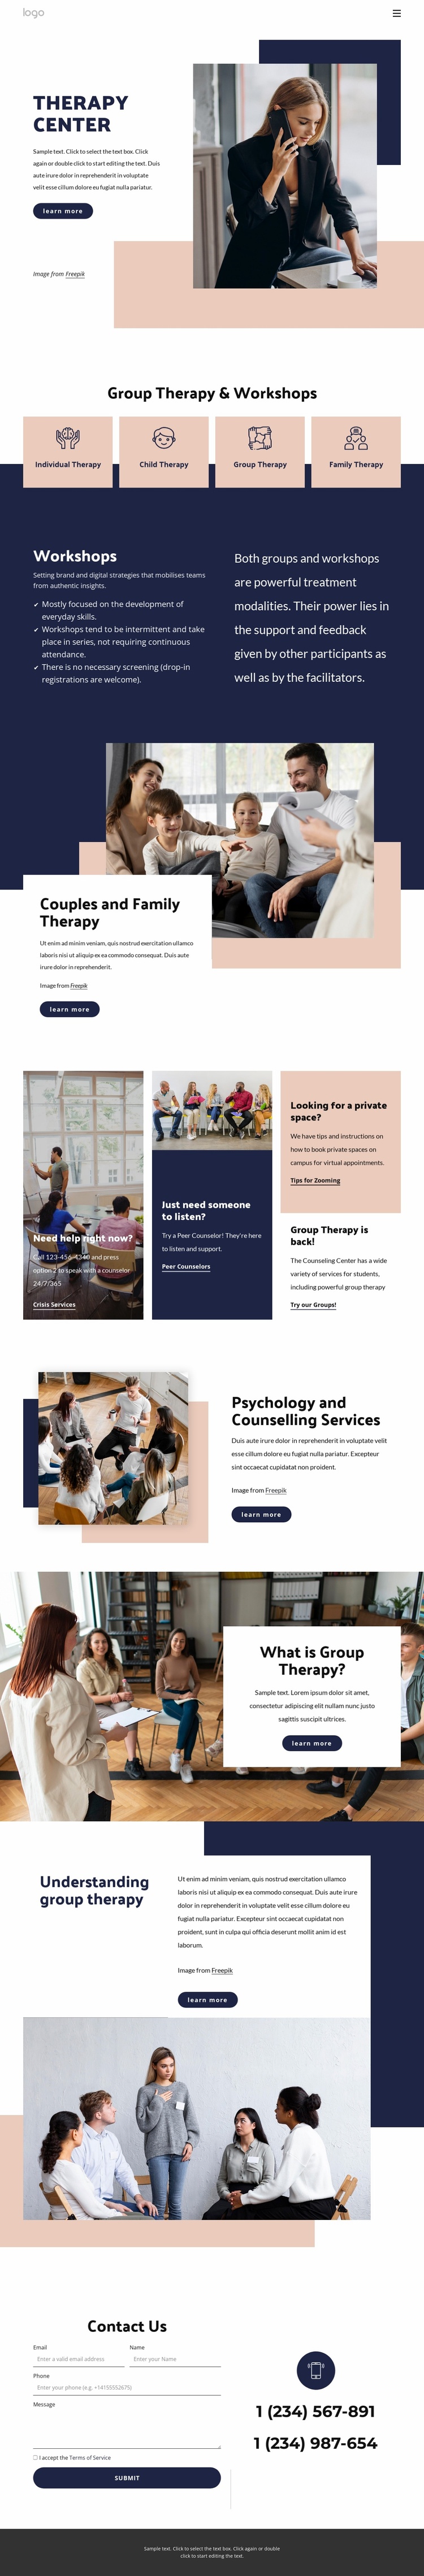 Therapy center Ecommerce Website Design